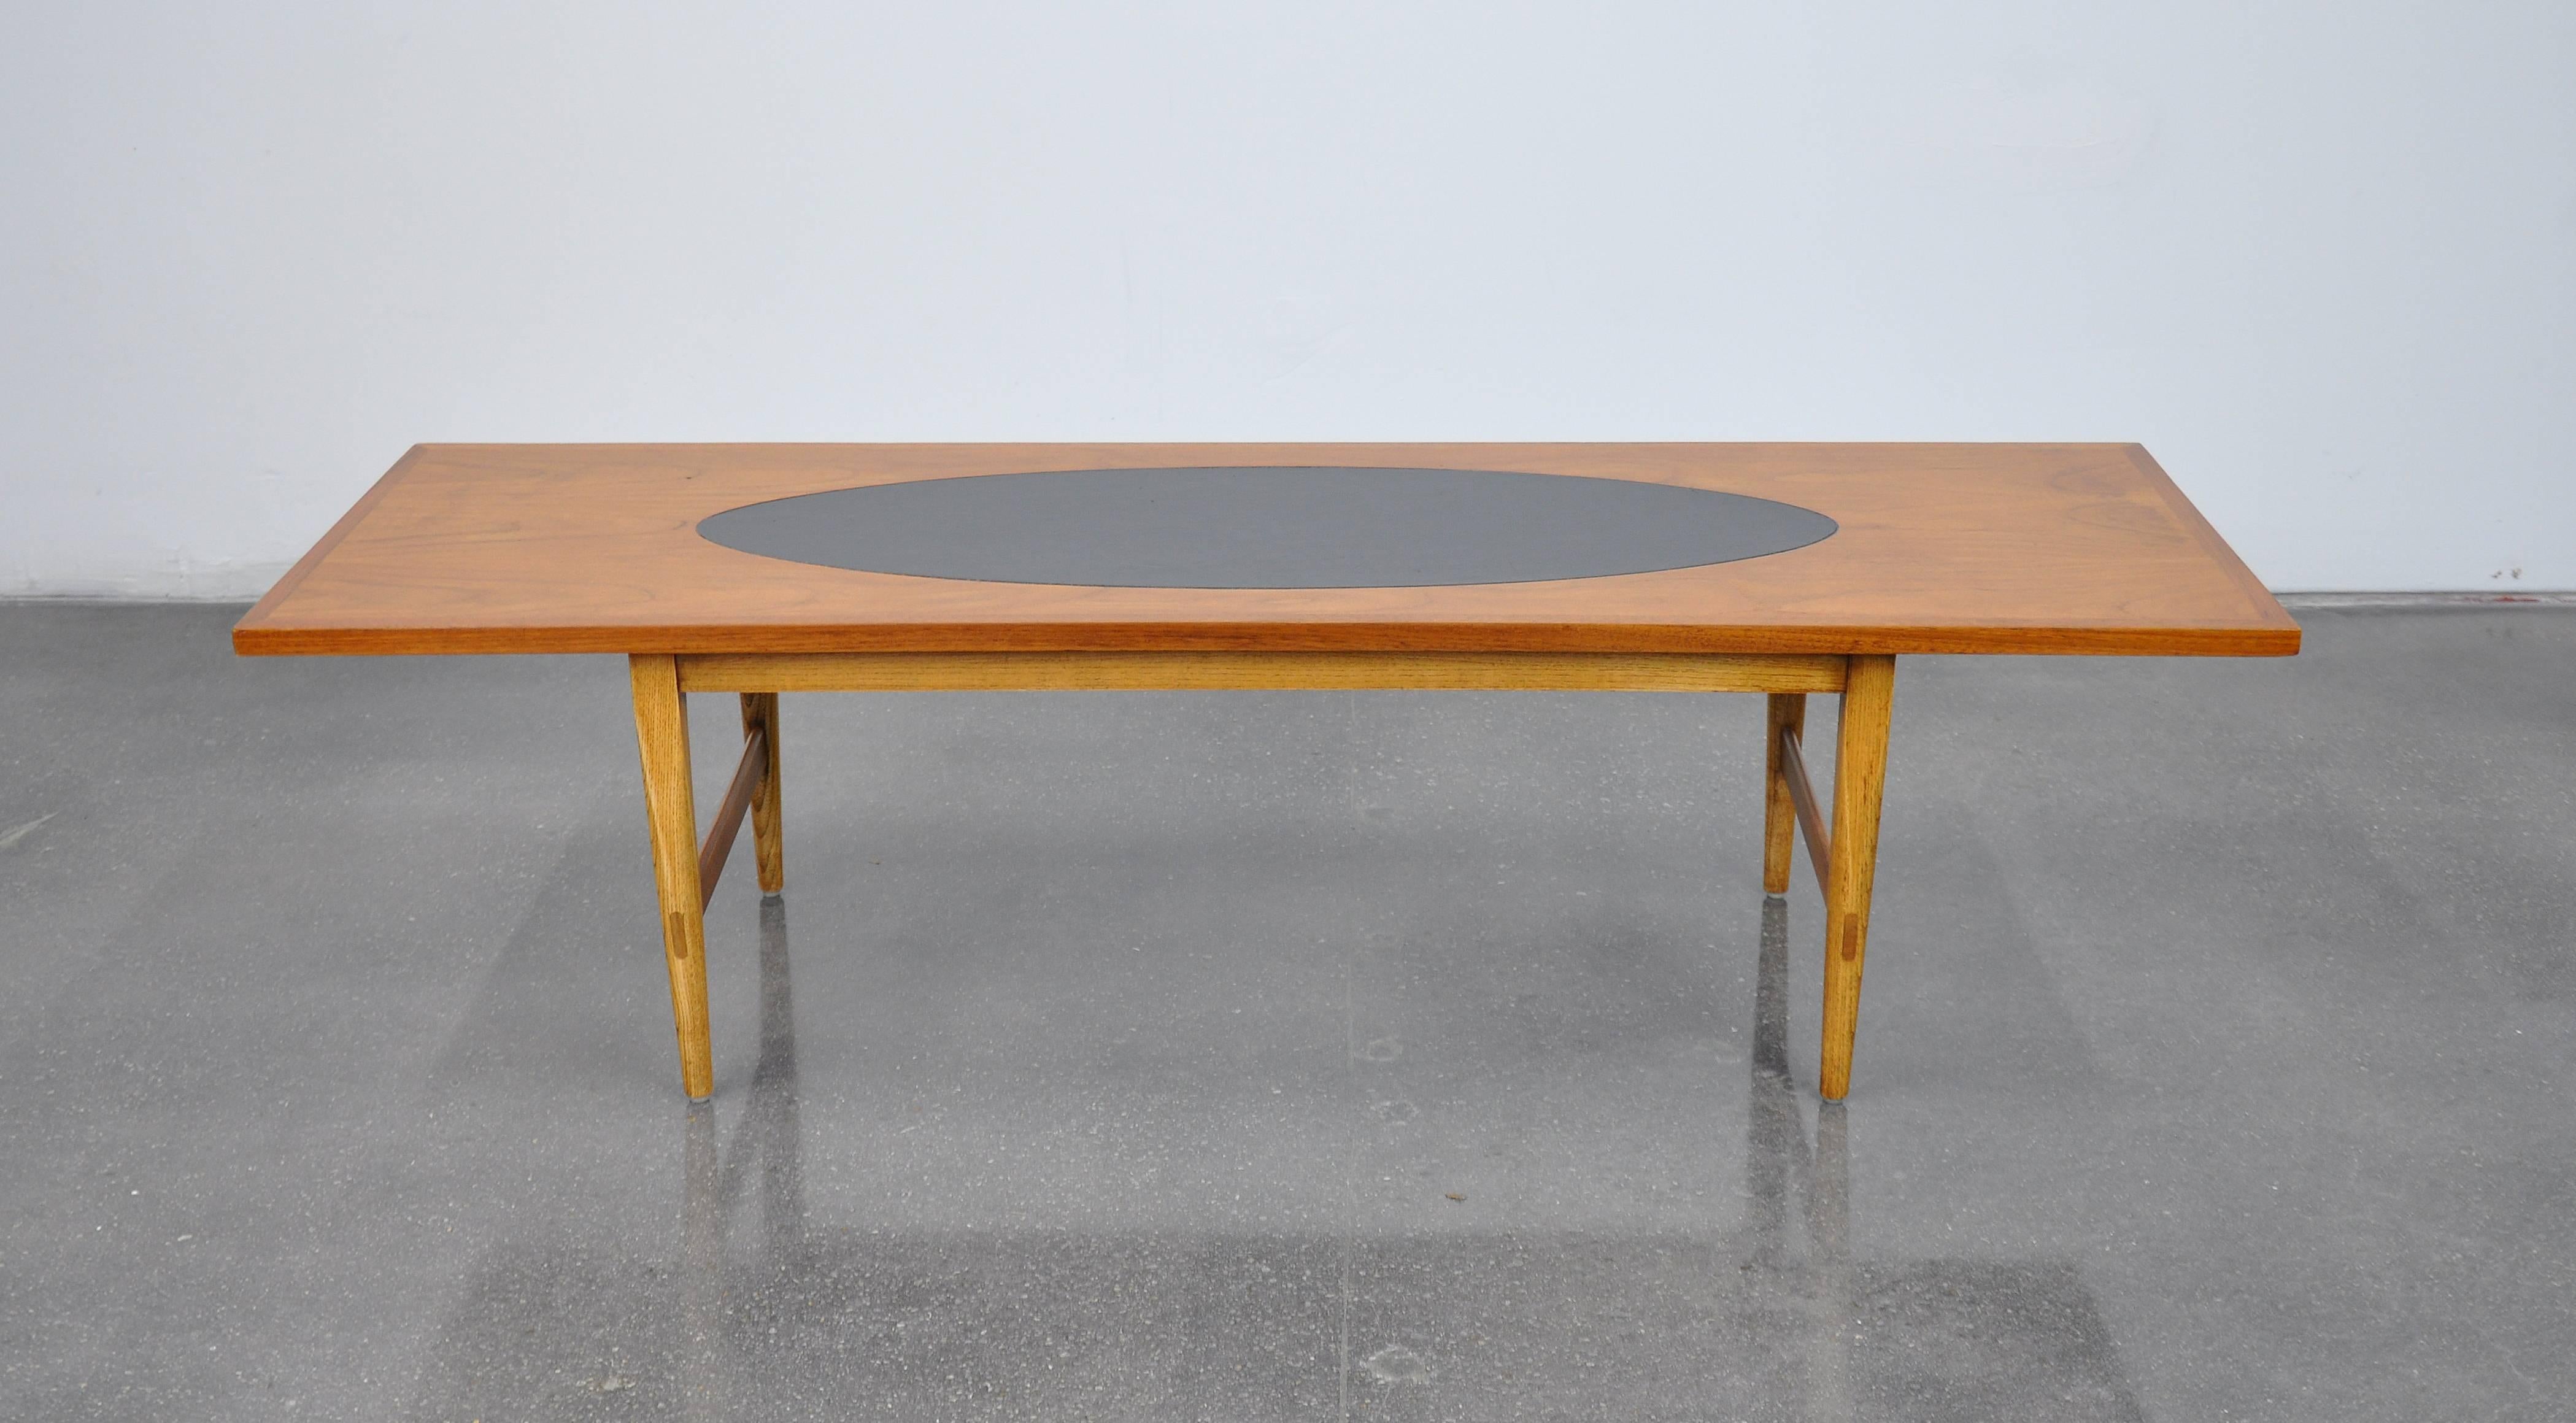 A very rare Mid-Century Modern vintage cocktail table designed for the Lane Signature collection by Paul McCobb, model 1000-01, dating from 1962. The table features an inlaid elliptical black leather top, highly figured grain and elegantly tapered